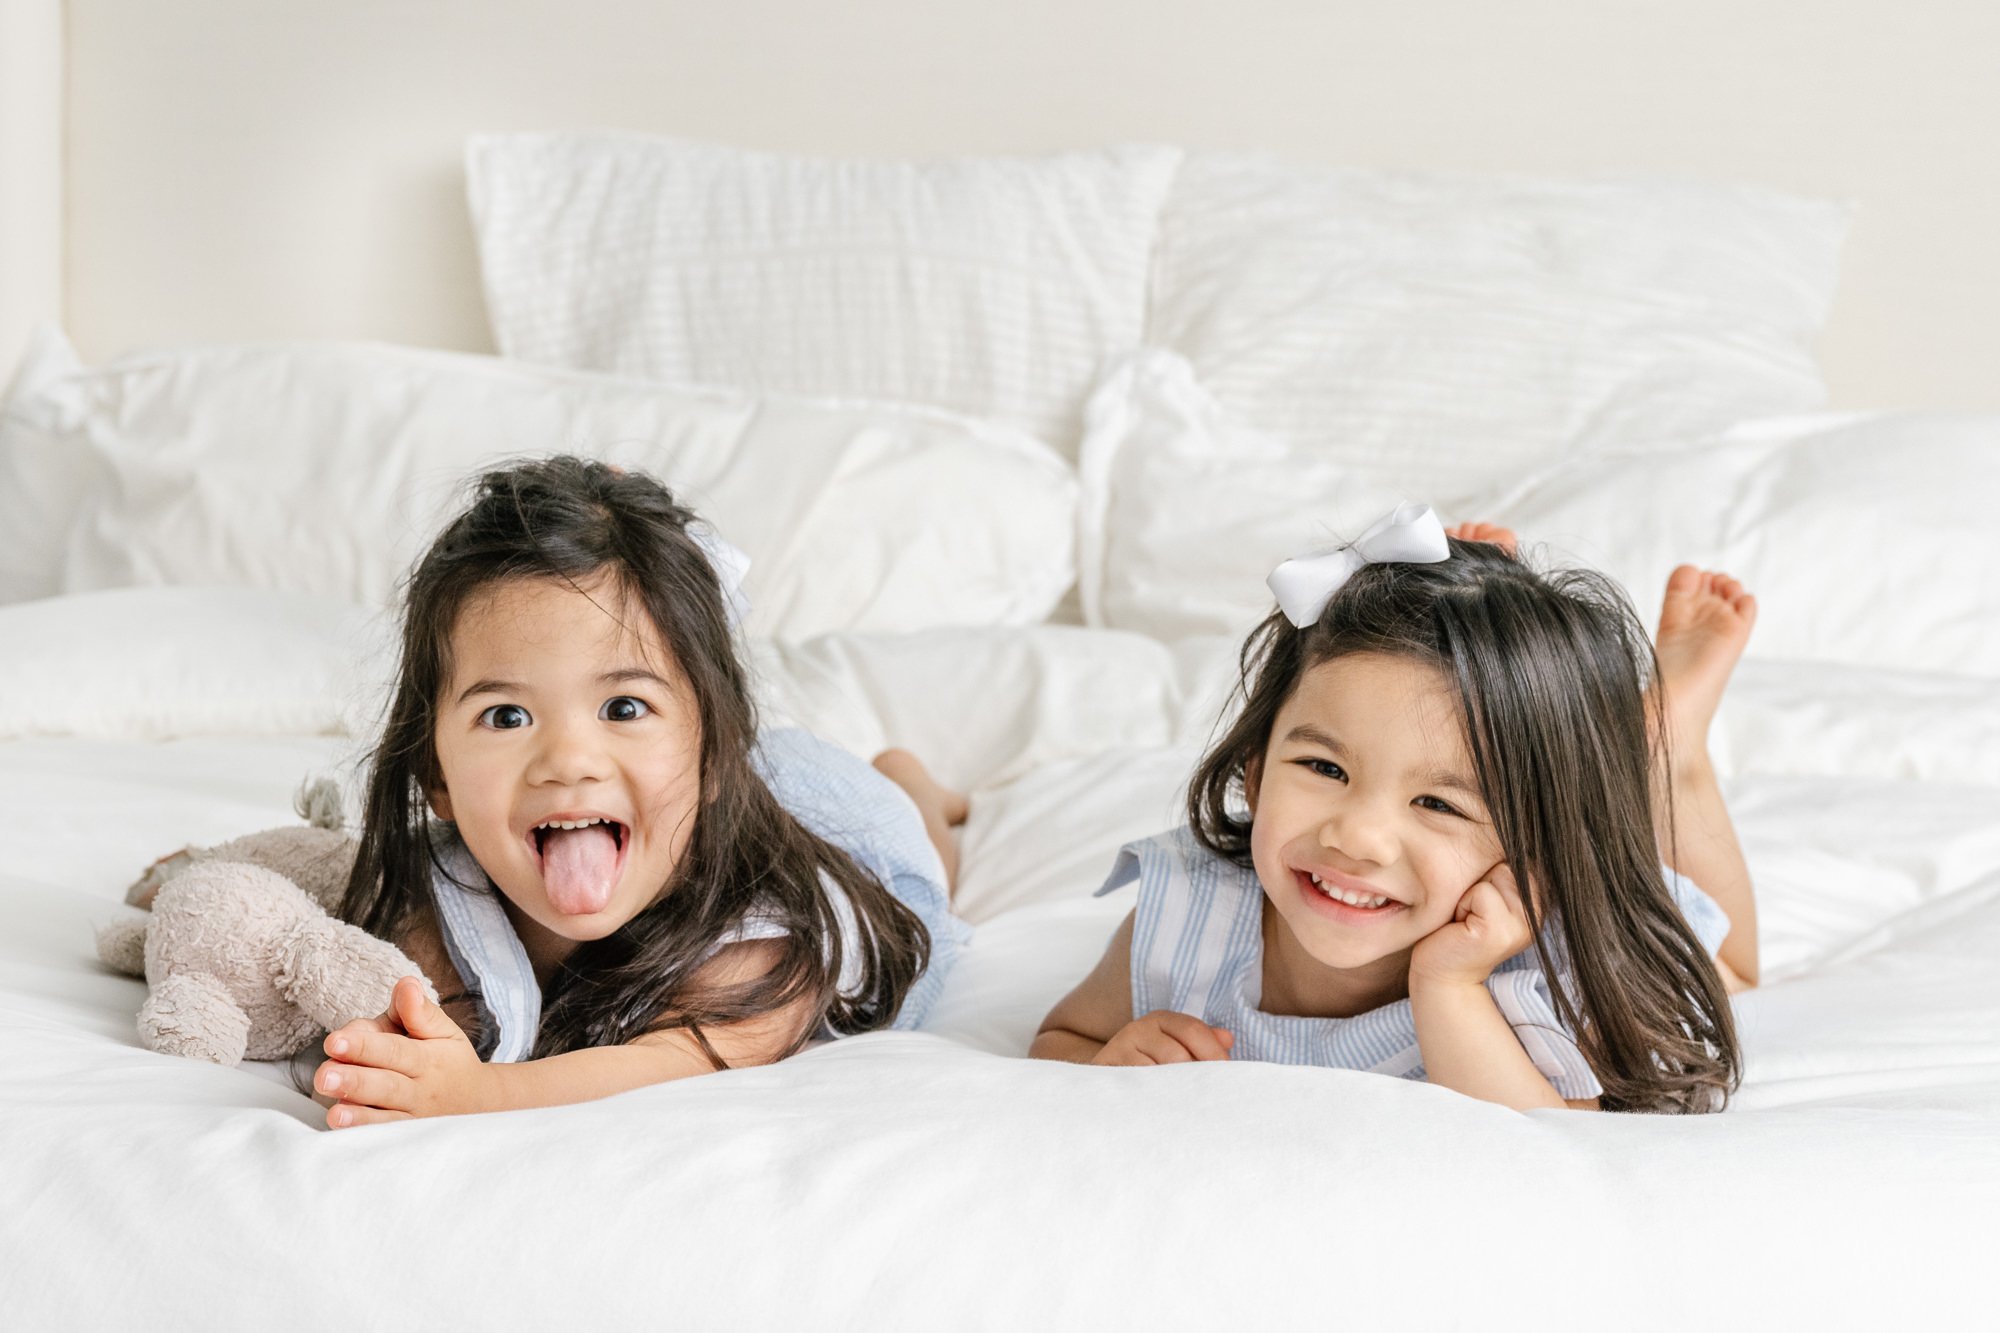  A fun photo of two sisters laying on mom and dad’s bed making silly faces while laughing together during their family portrait session. #newyorkcityphotographer #familyportraits #newbornportraitsession #inhomephotography #familyoffive #familyposeins